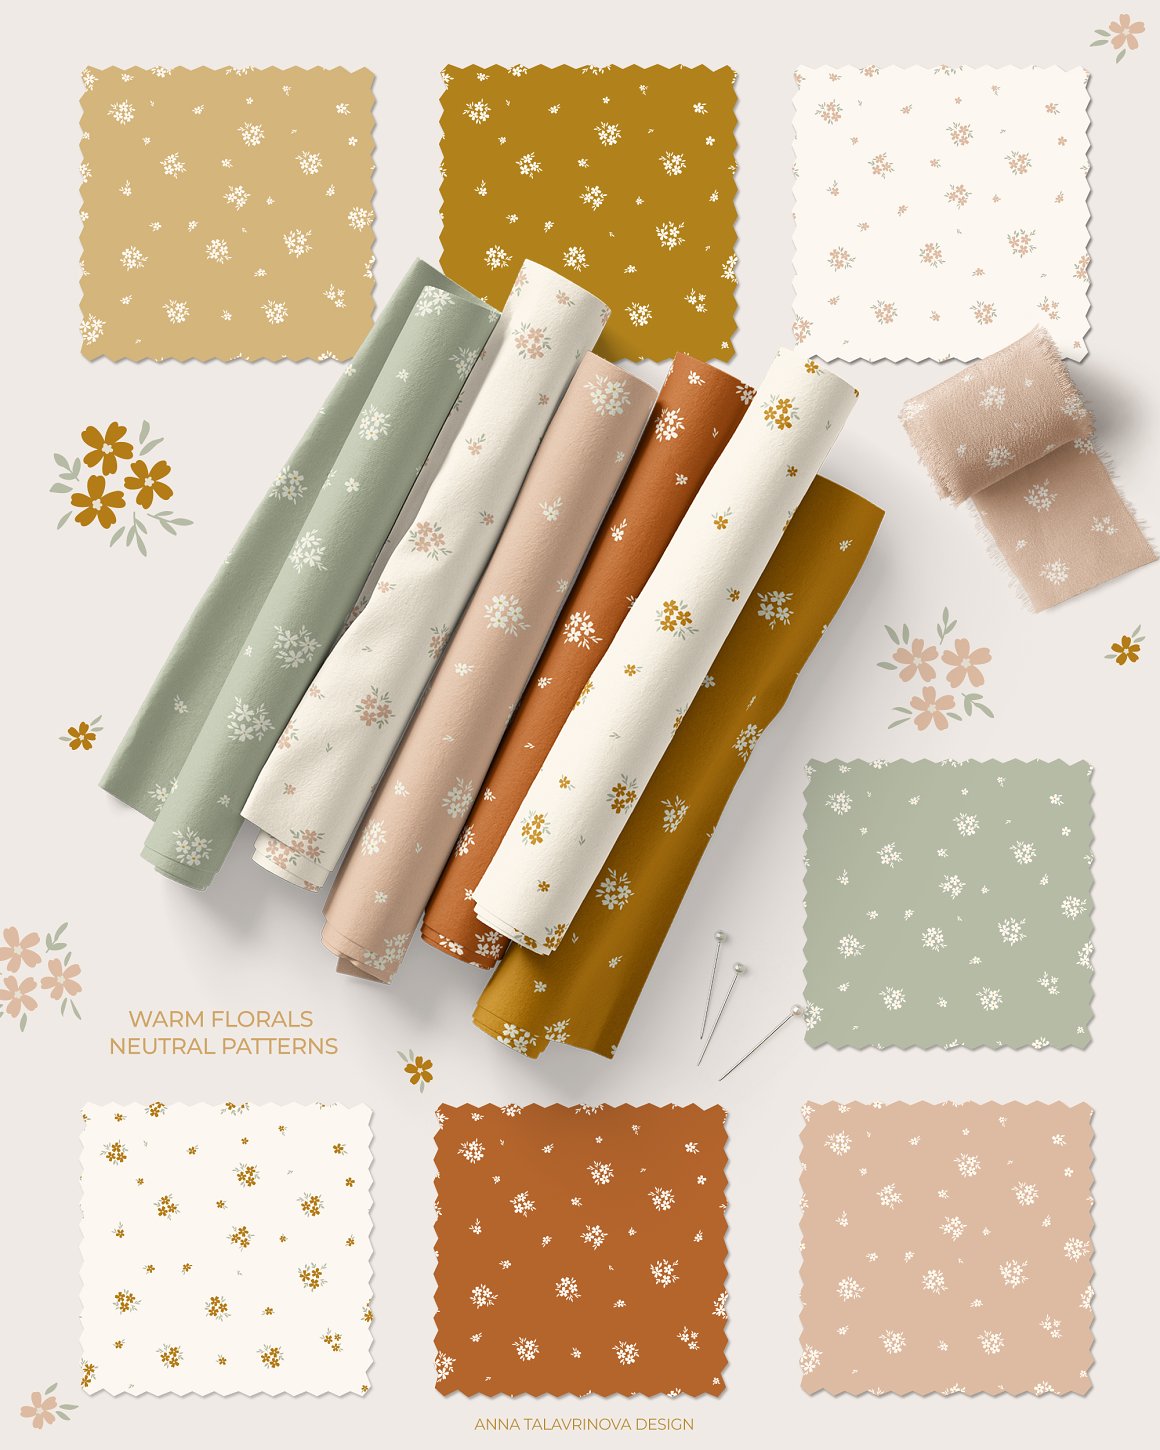 7 fabric with neutral warm florals patterns and the same patterns on fabric rolls.